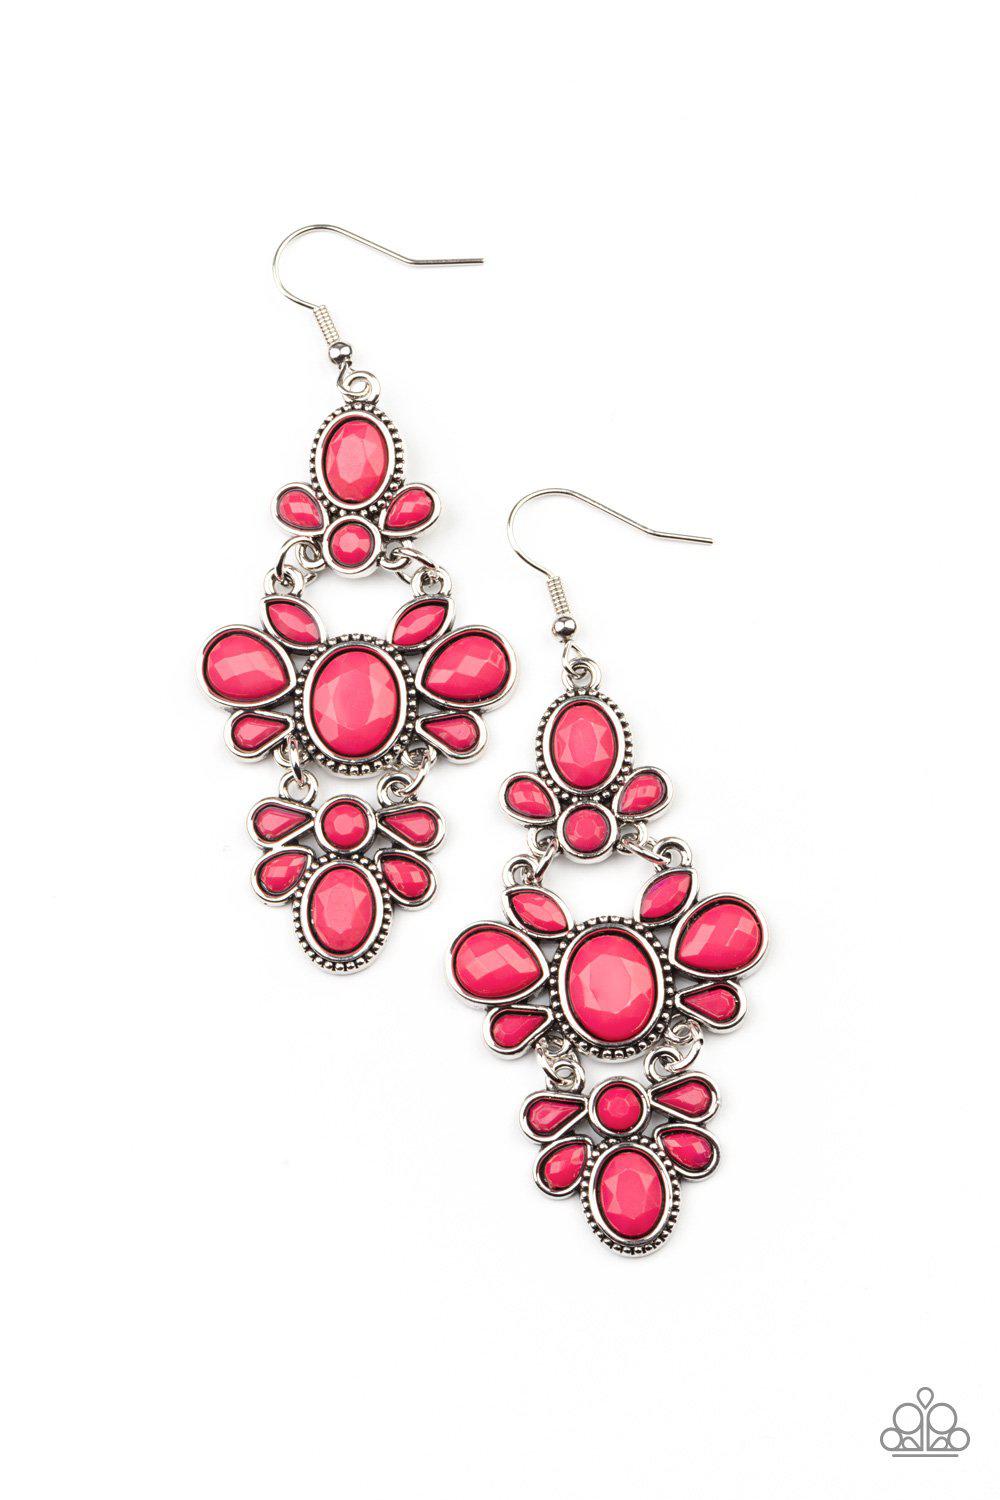 VACAY The Premises Pink Earrings - Paparazzi Accessories- lightbox - CarasShop.com - $5 Jewelry by Cara Jewels